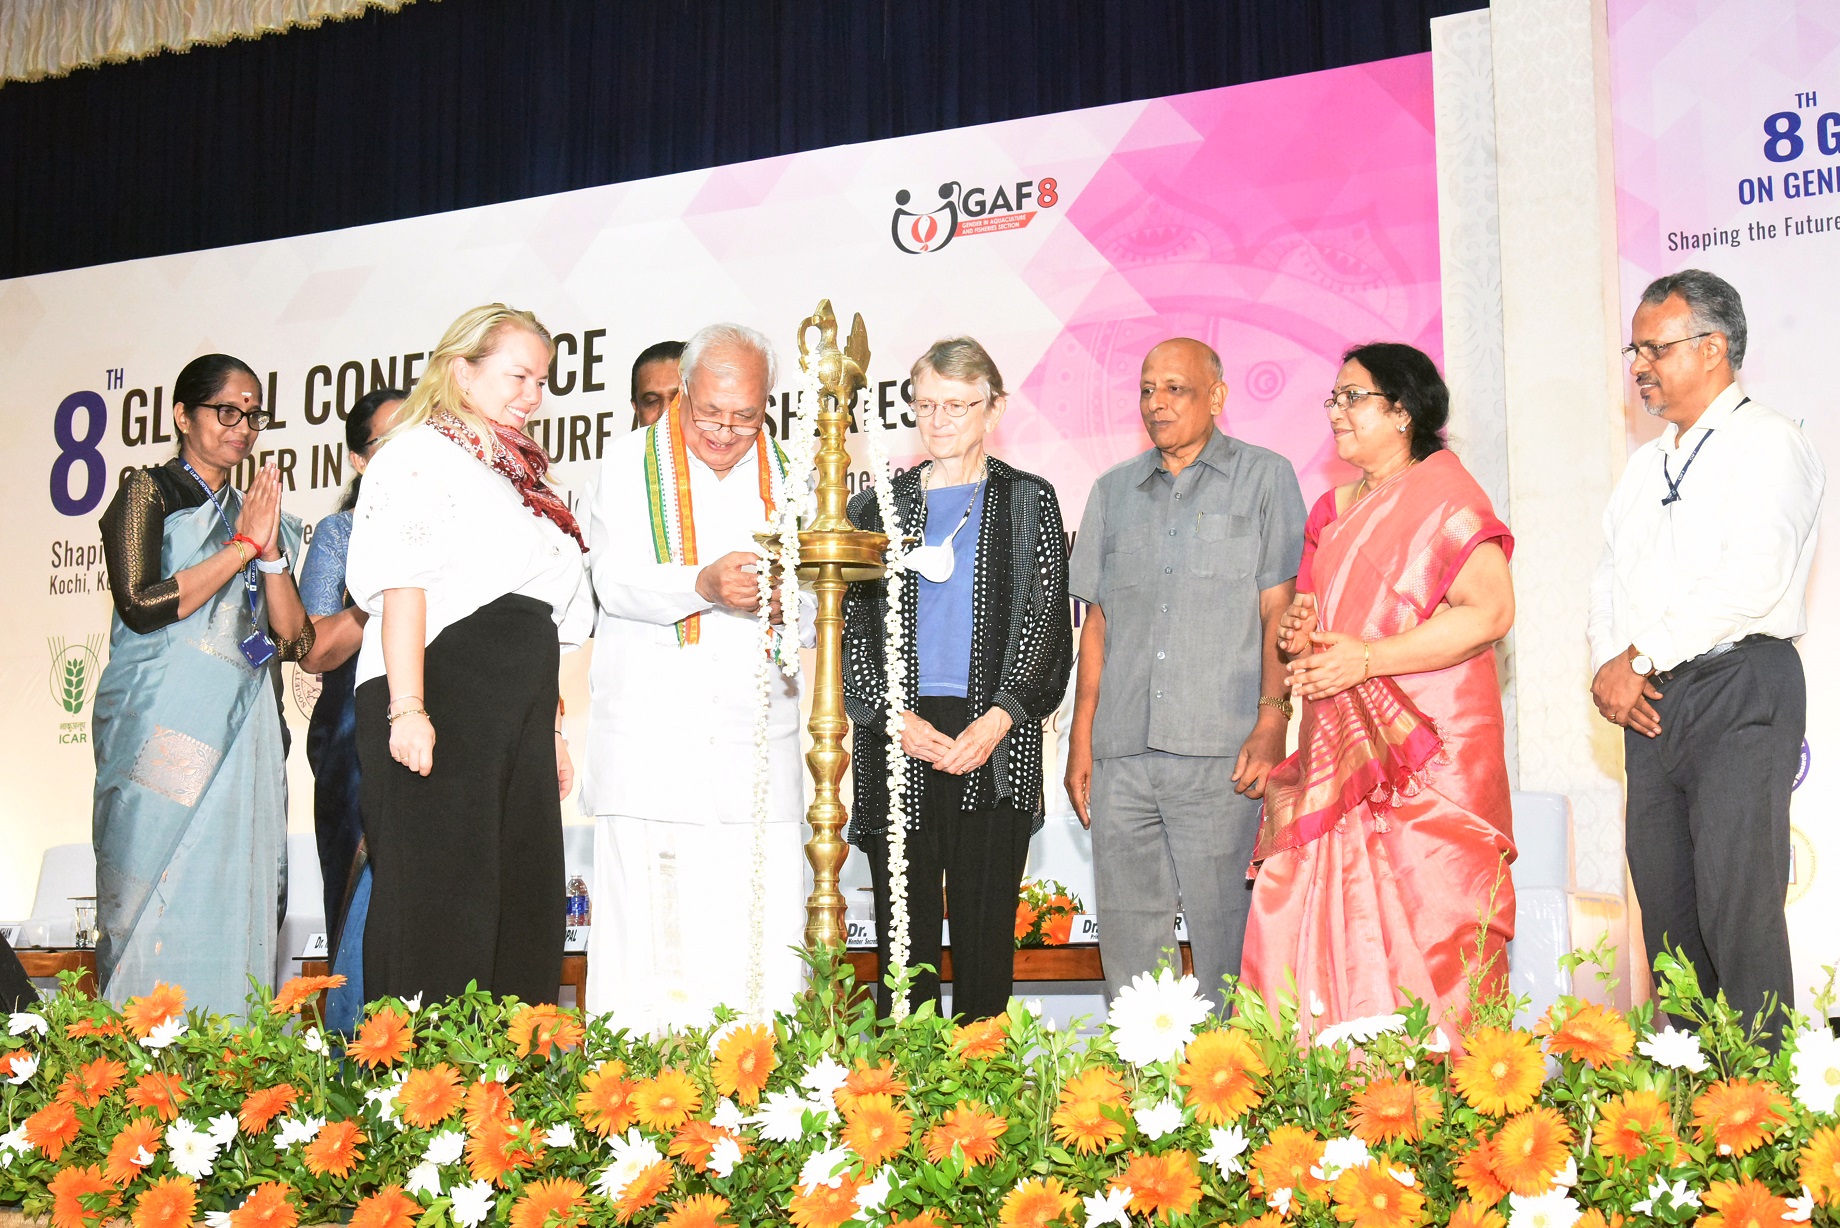 8th Global Conference on Gender in Aquaculture and Fisheries (GAF8) inaugurated in Kochi